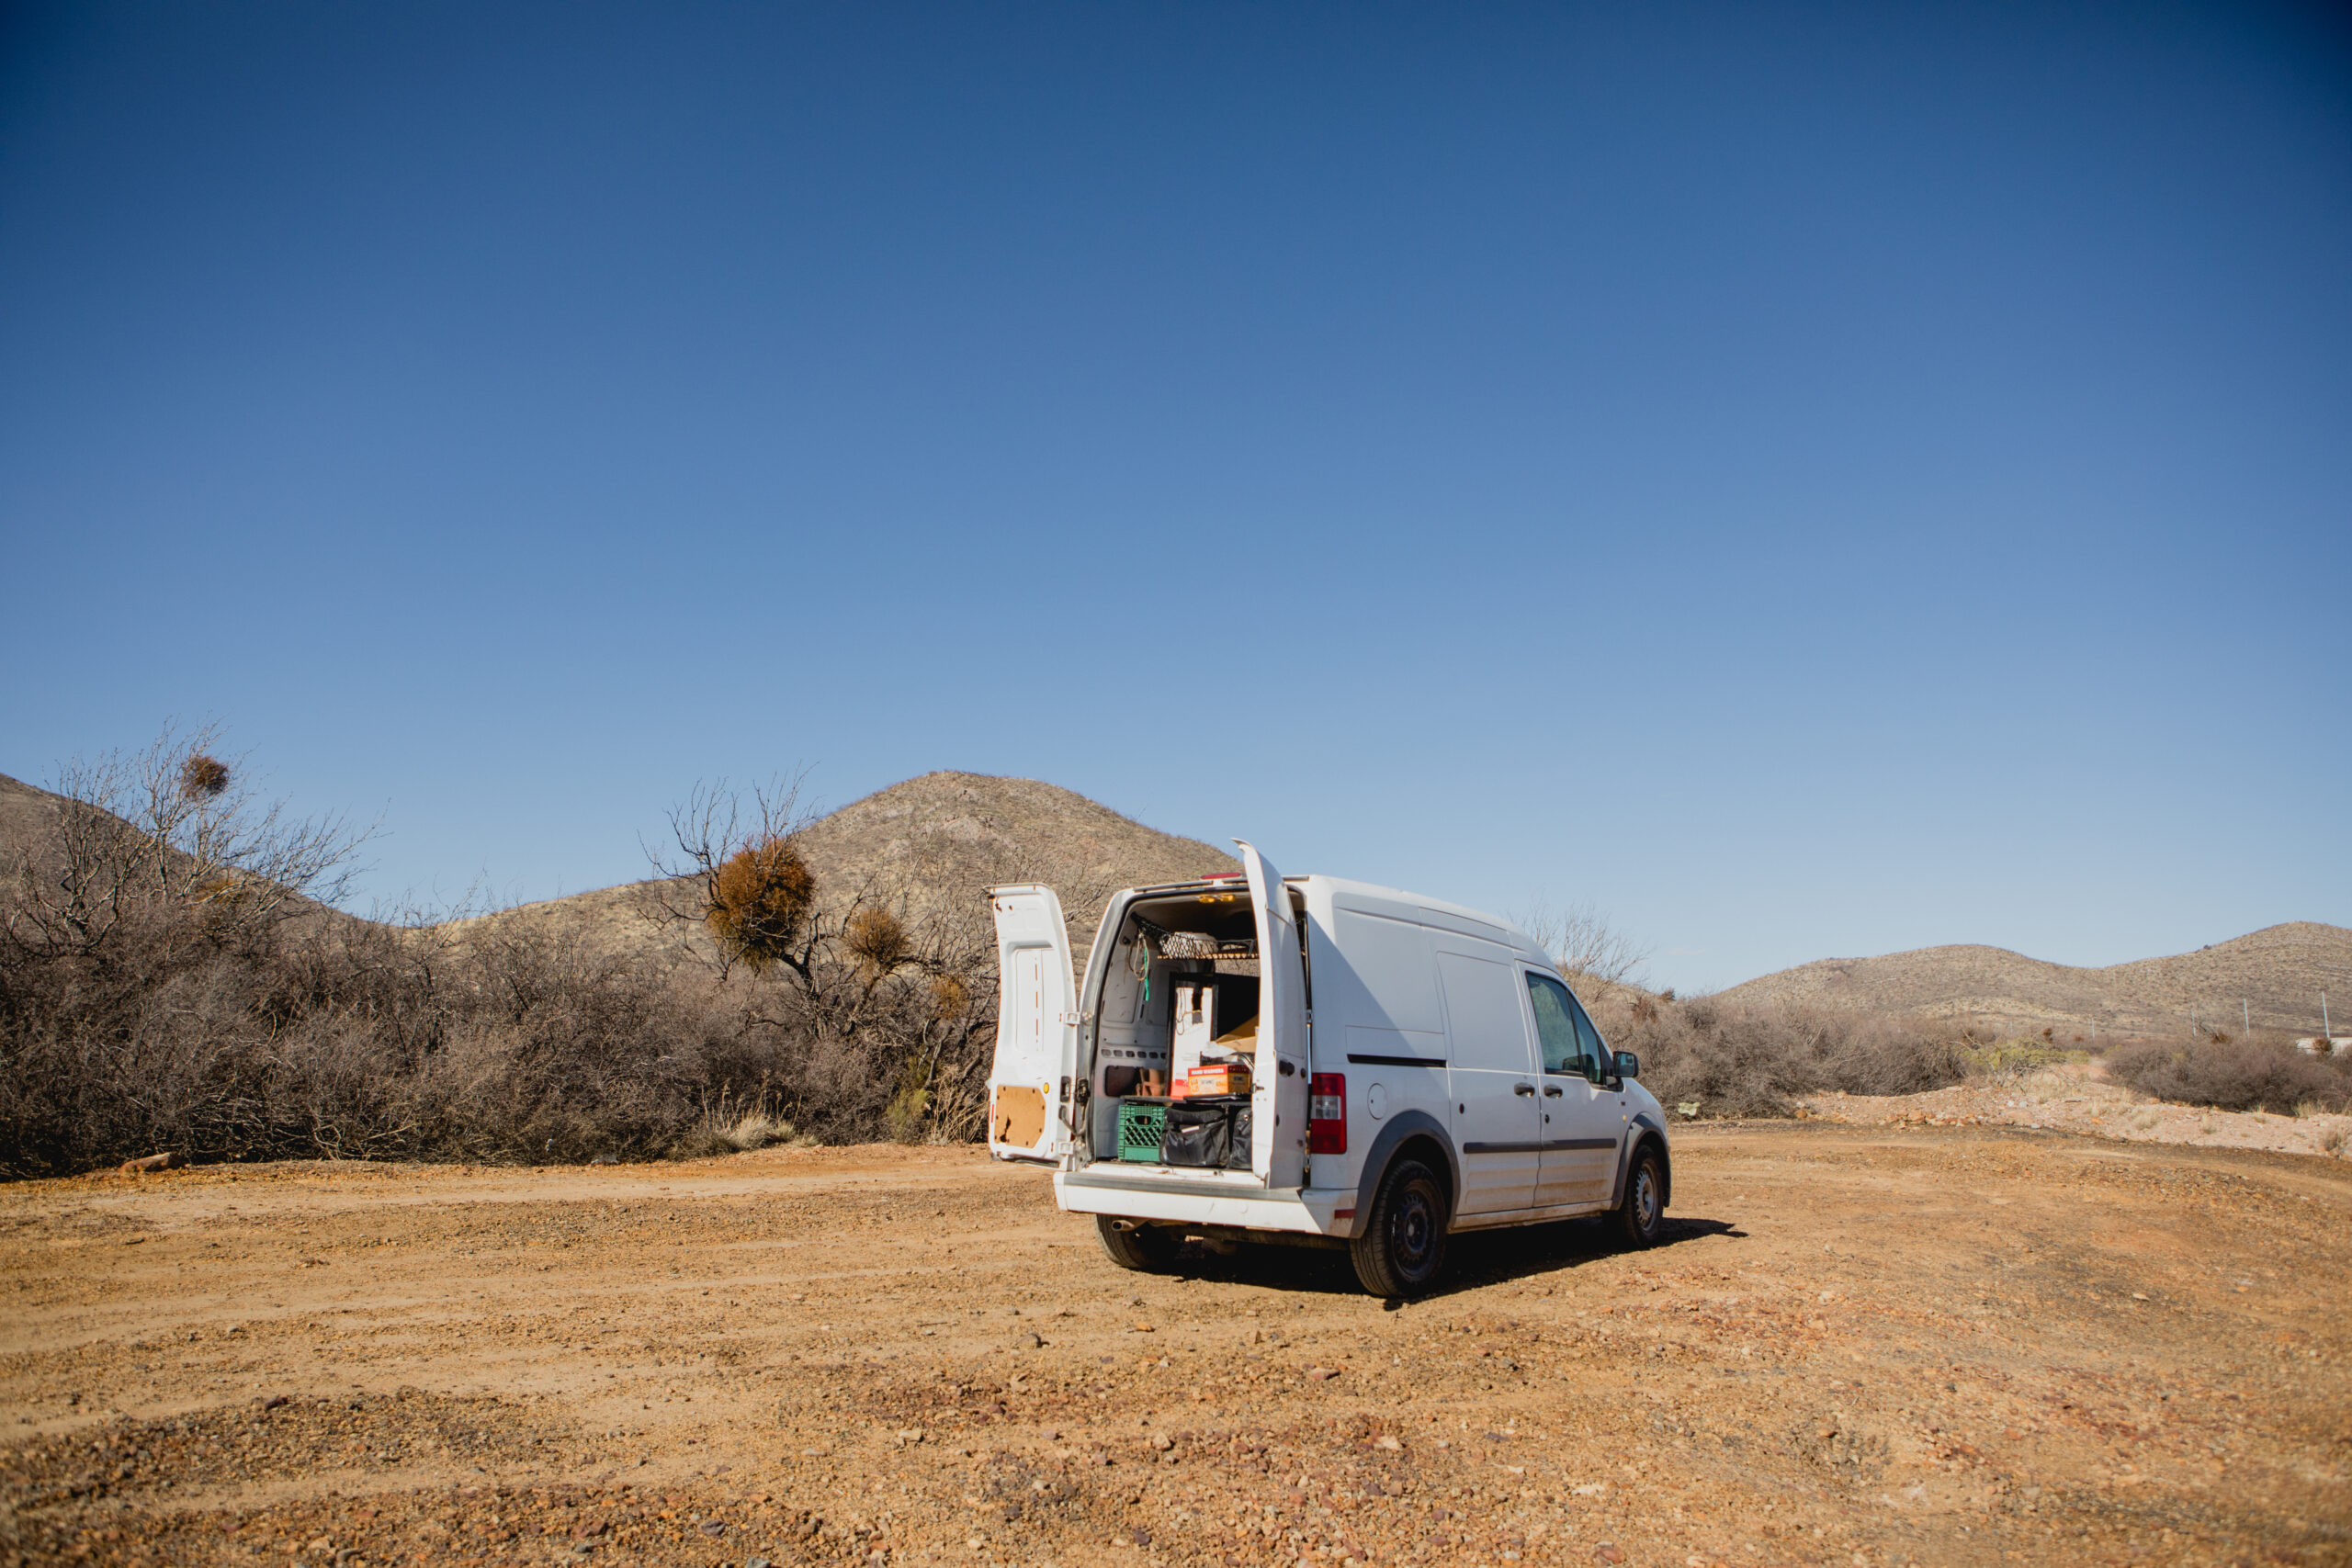 White sprinter van with rear doors open parked in desert with blue sky